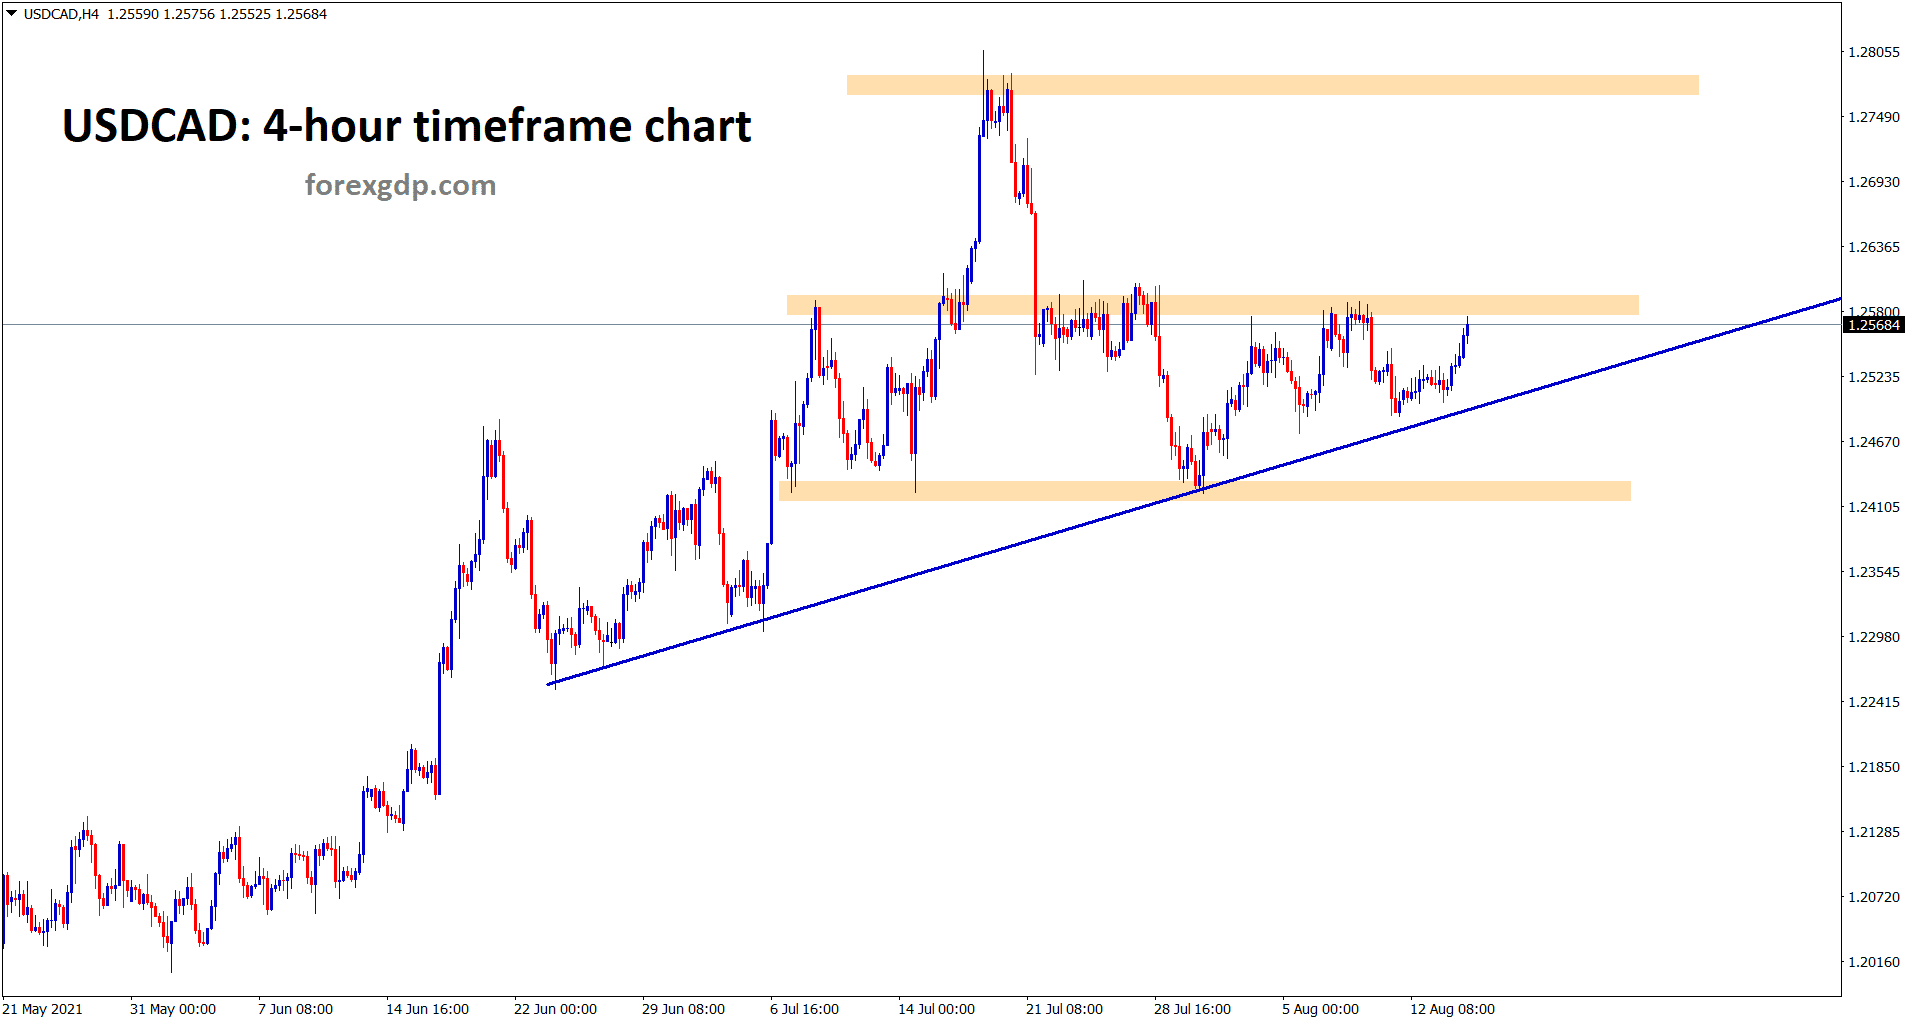 USDCAD moving in an uptrend range between the resistance and support